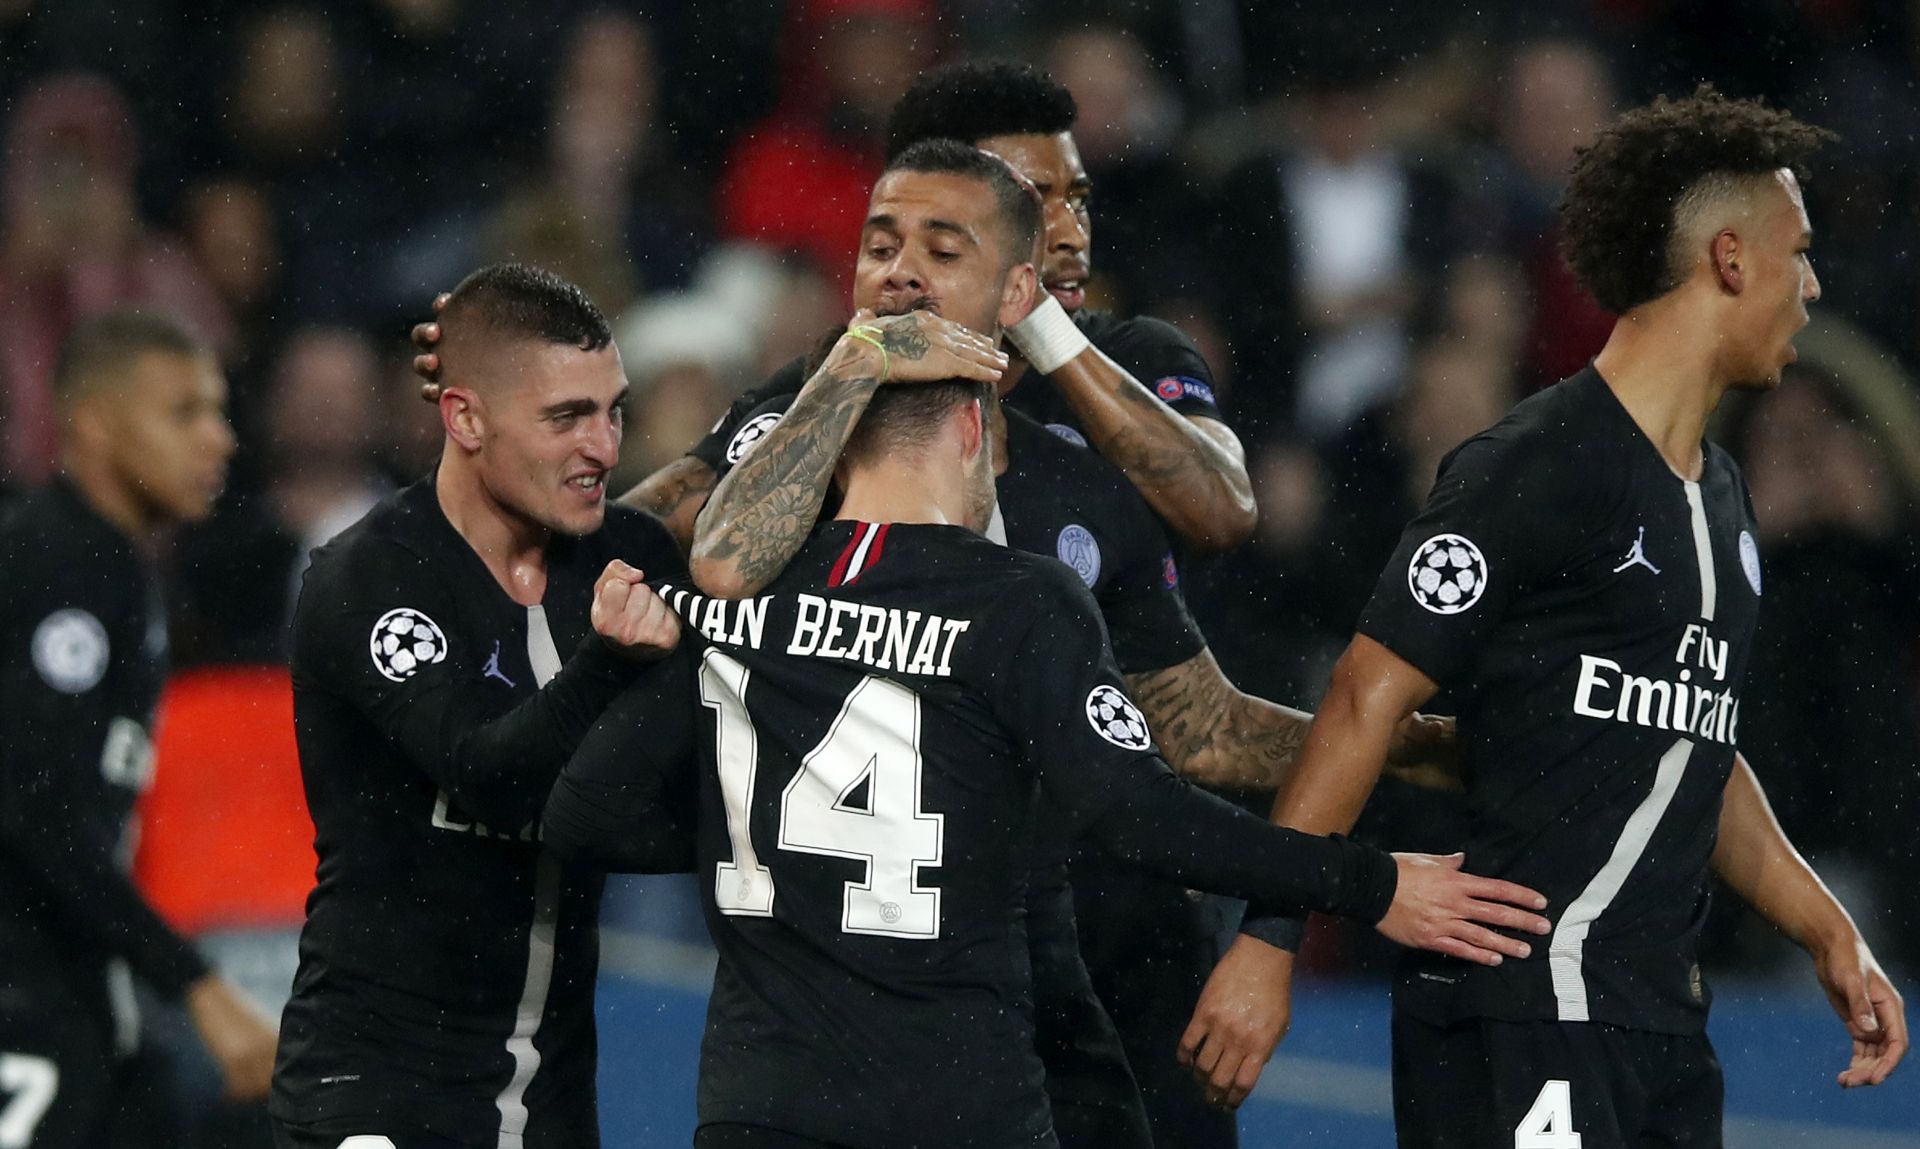 epa07418112 Paris Saint Germain's Juan Bernat celebrates with his teammates after scoring the equalizer during the UEFA Champions League round of 16 second leg soccer match between PSG and Manchester United at the Parc des Princes Stadium in Paris, France, 06 March 2019.  EPA/IAN LANGSDON